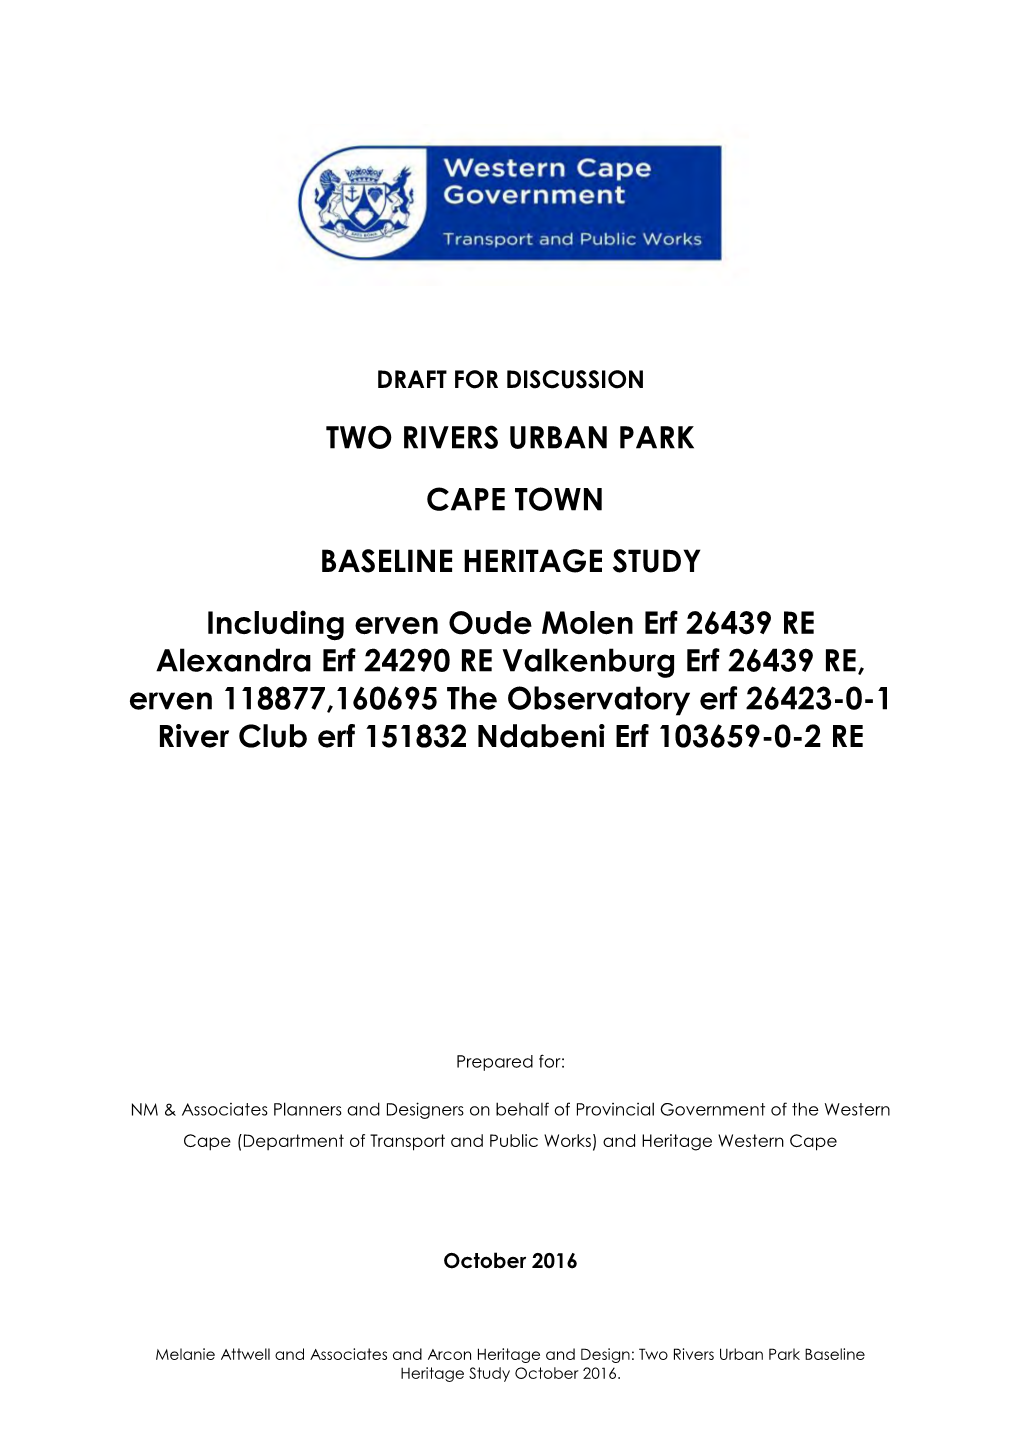 Two Rivers Urban Park Baseline Heritage Study October 2016